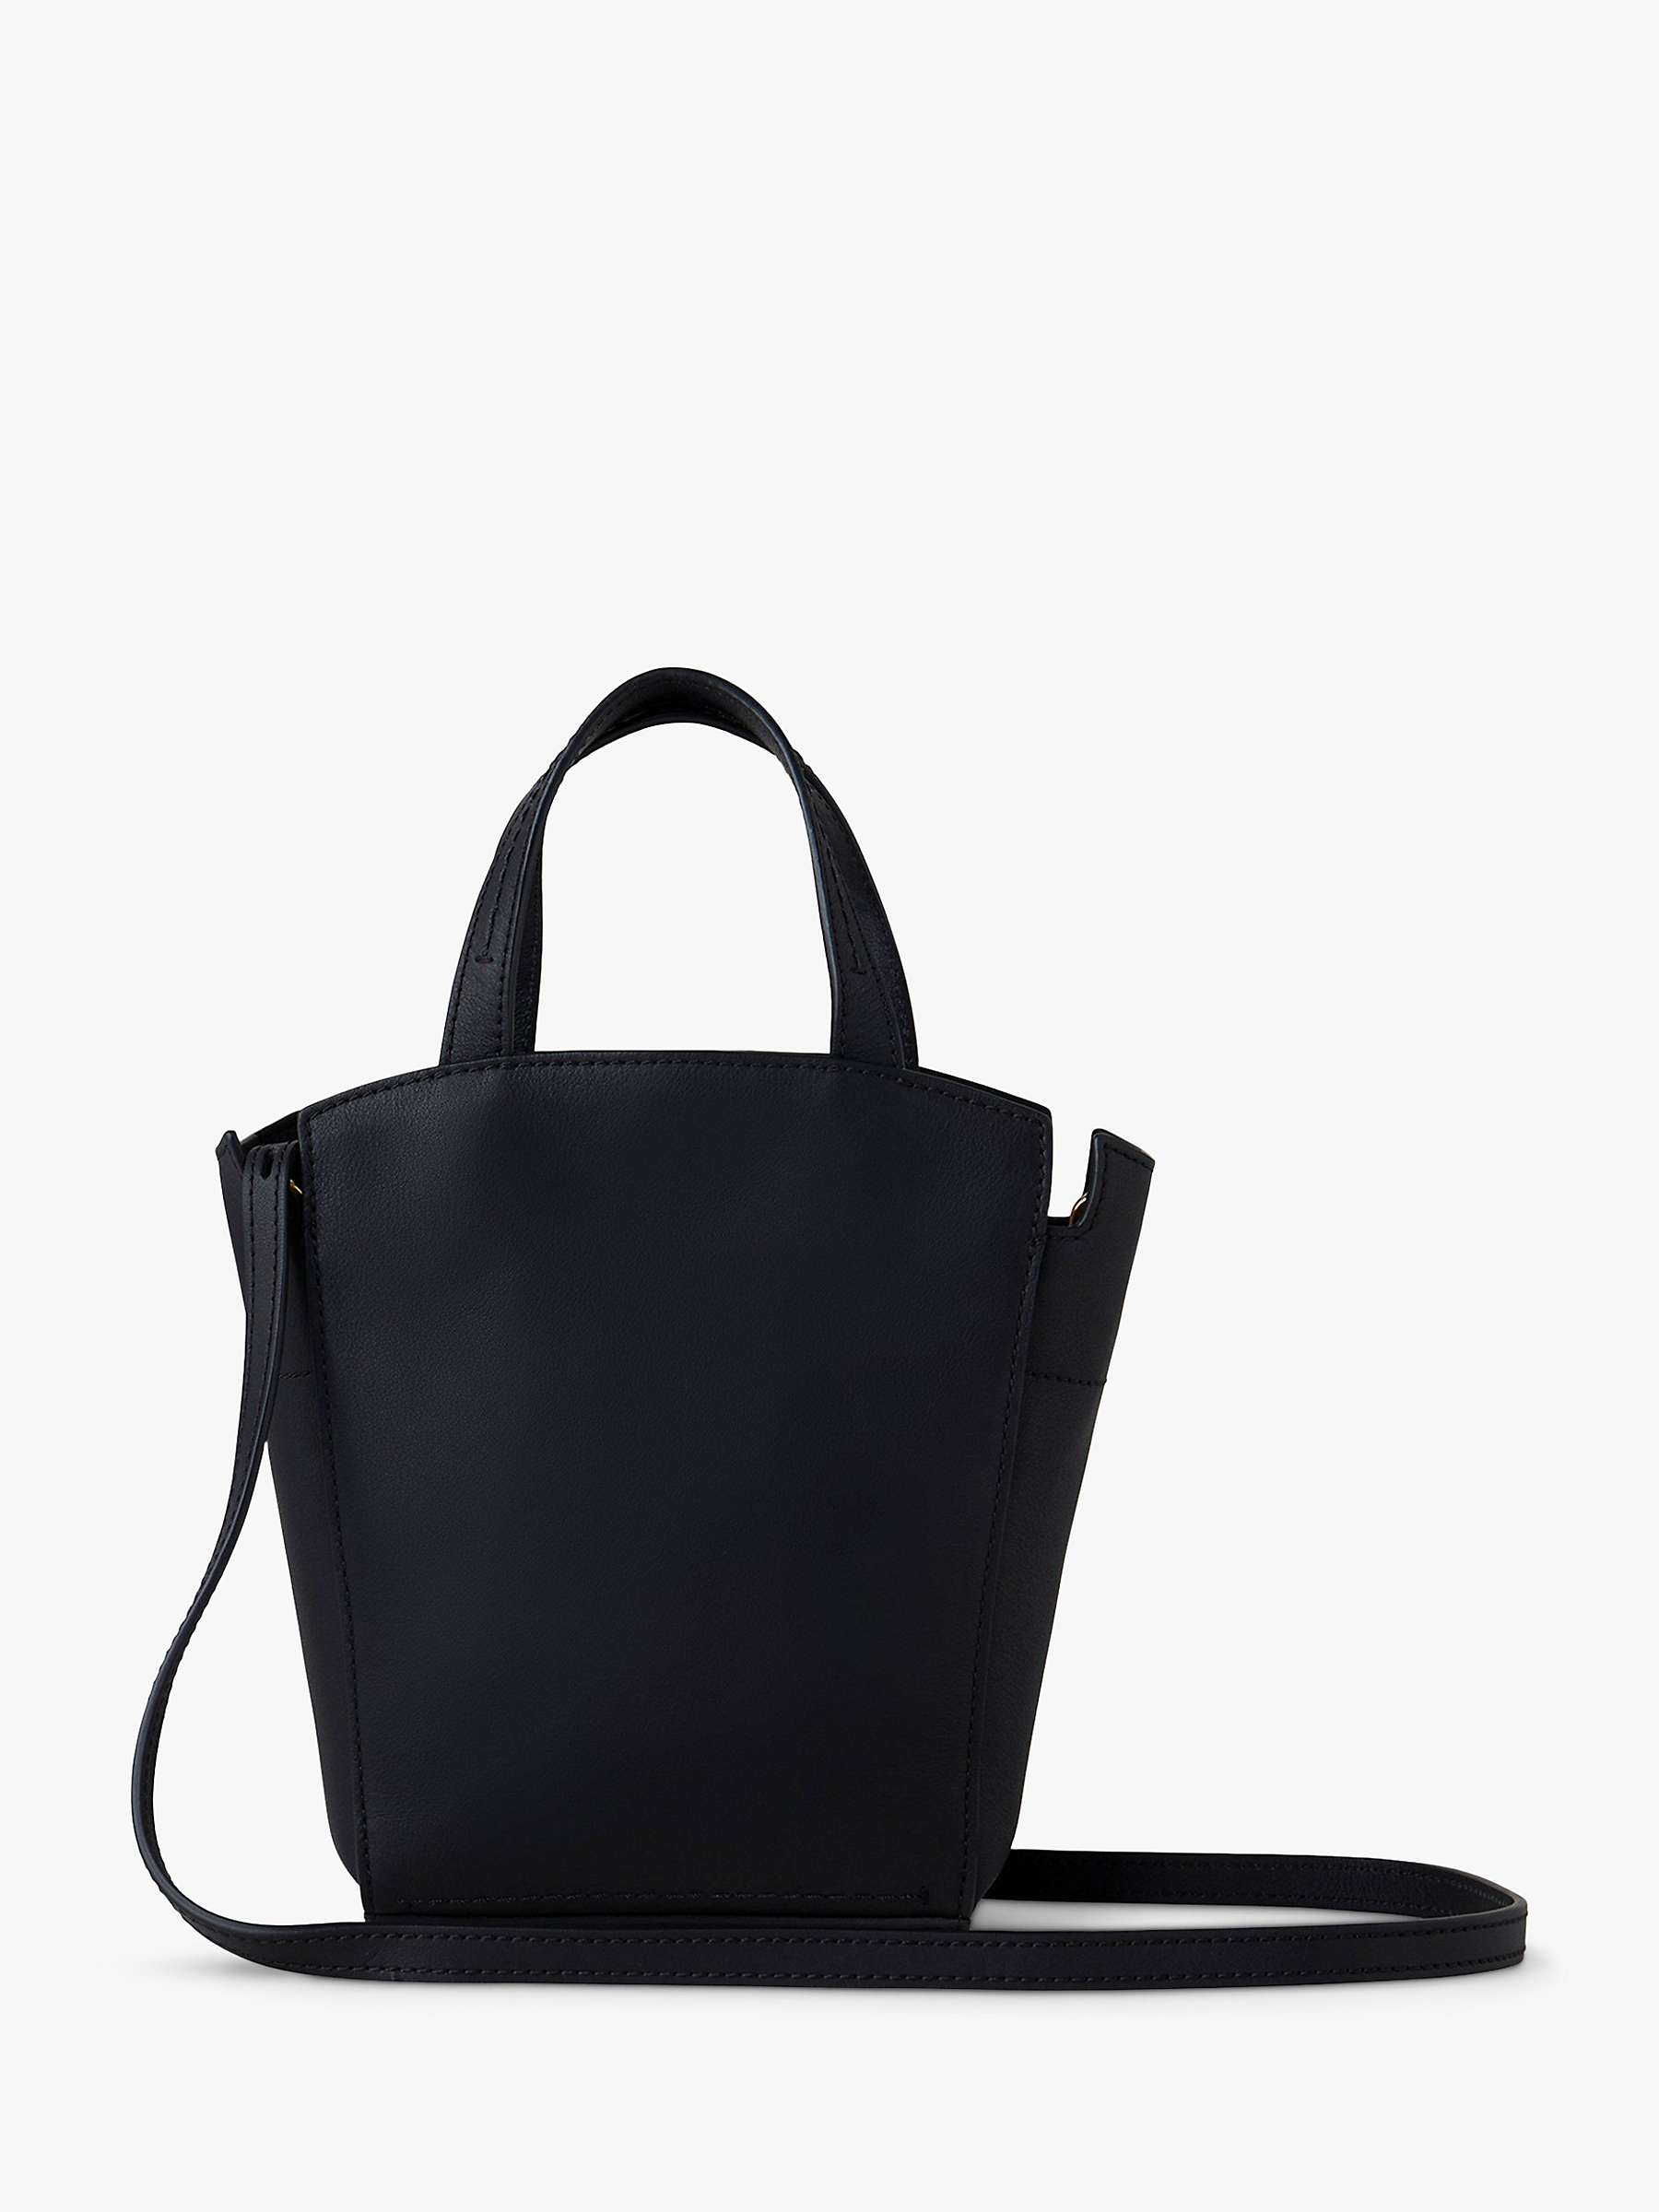 Buy Mulberry Mini Clovelly Refined Flat Calf Tote Bag Online at johnlewis.com